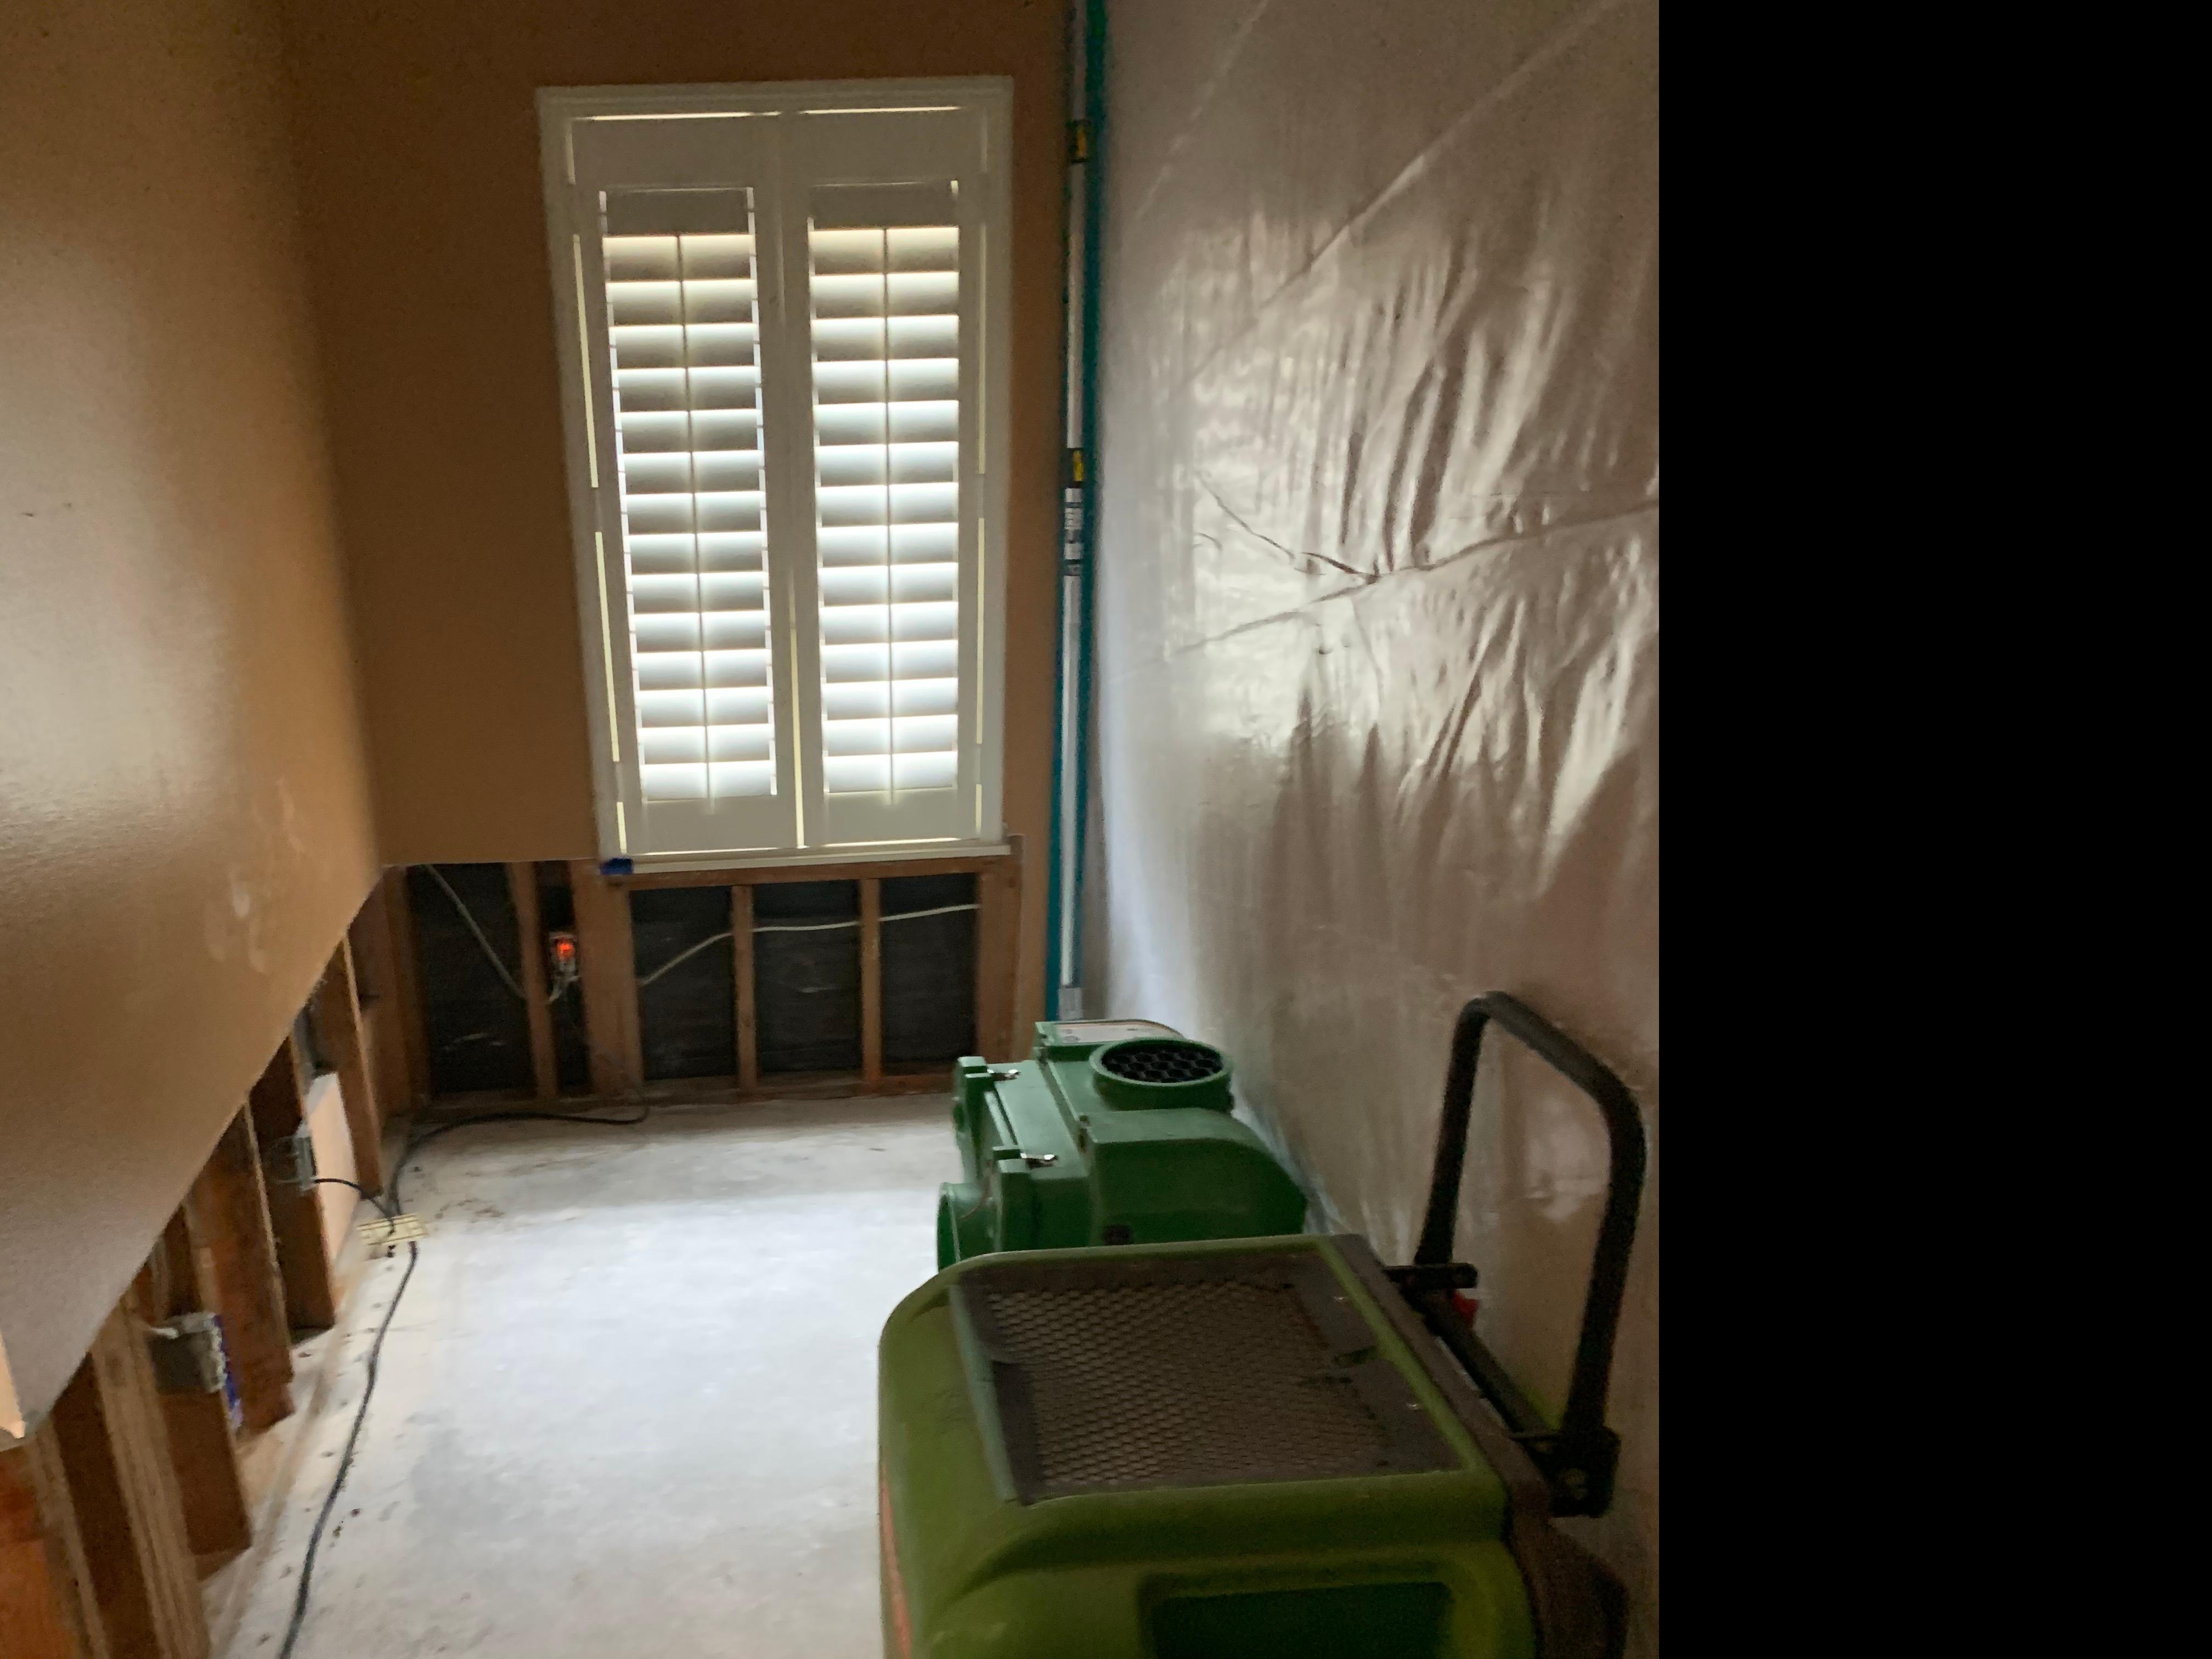 When water mitigation reveals the mold hiding in the walls, SERVPRO of Laguna Beach/Dana Point can remediate the mold as well.